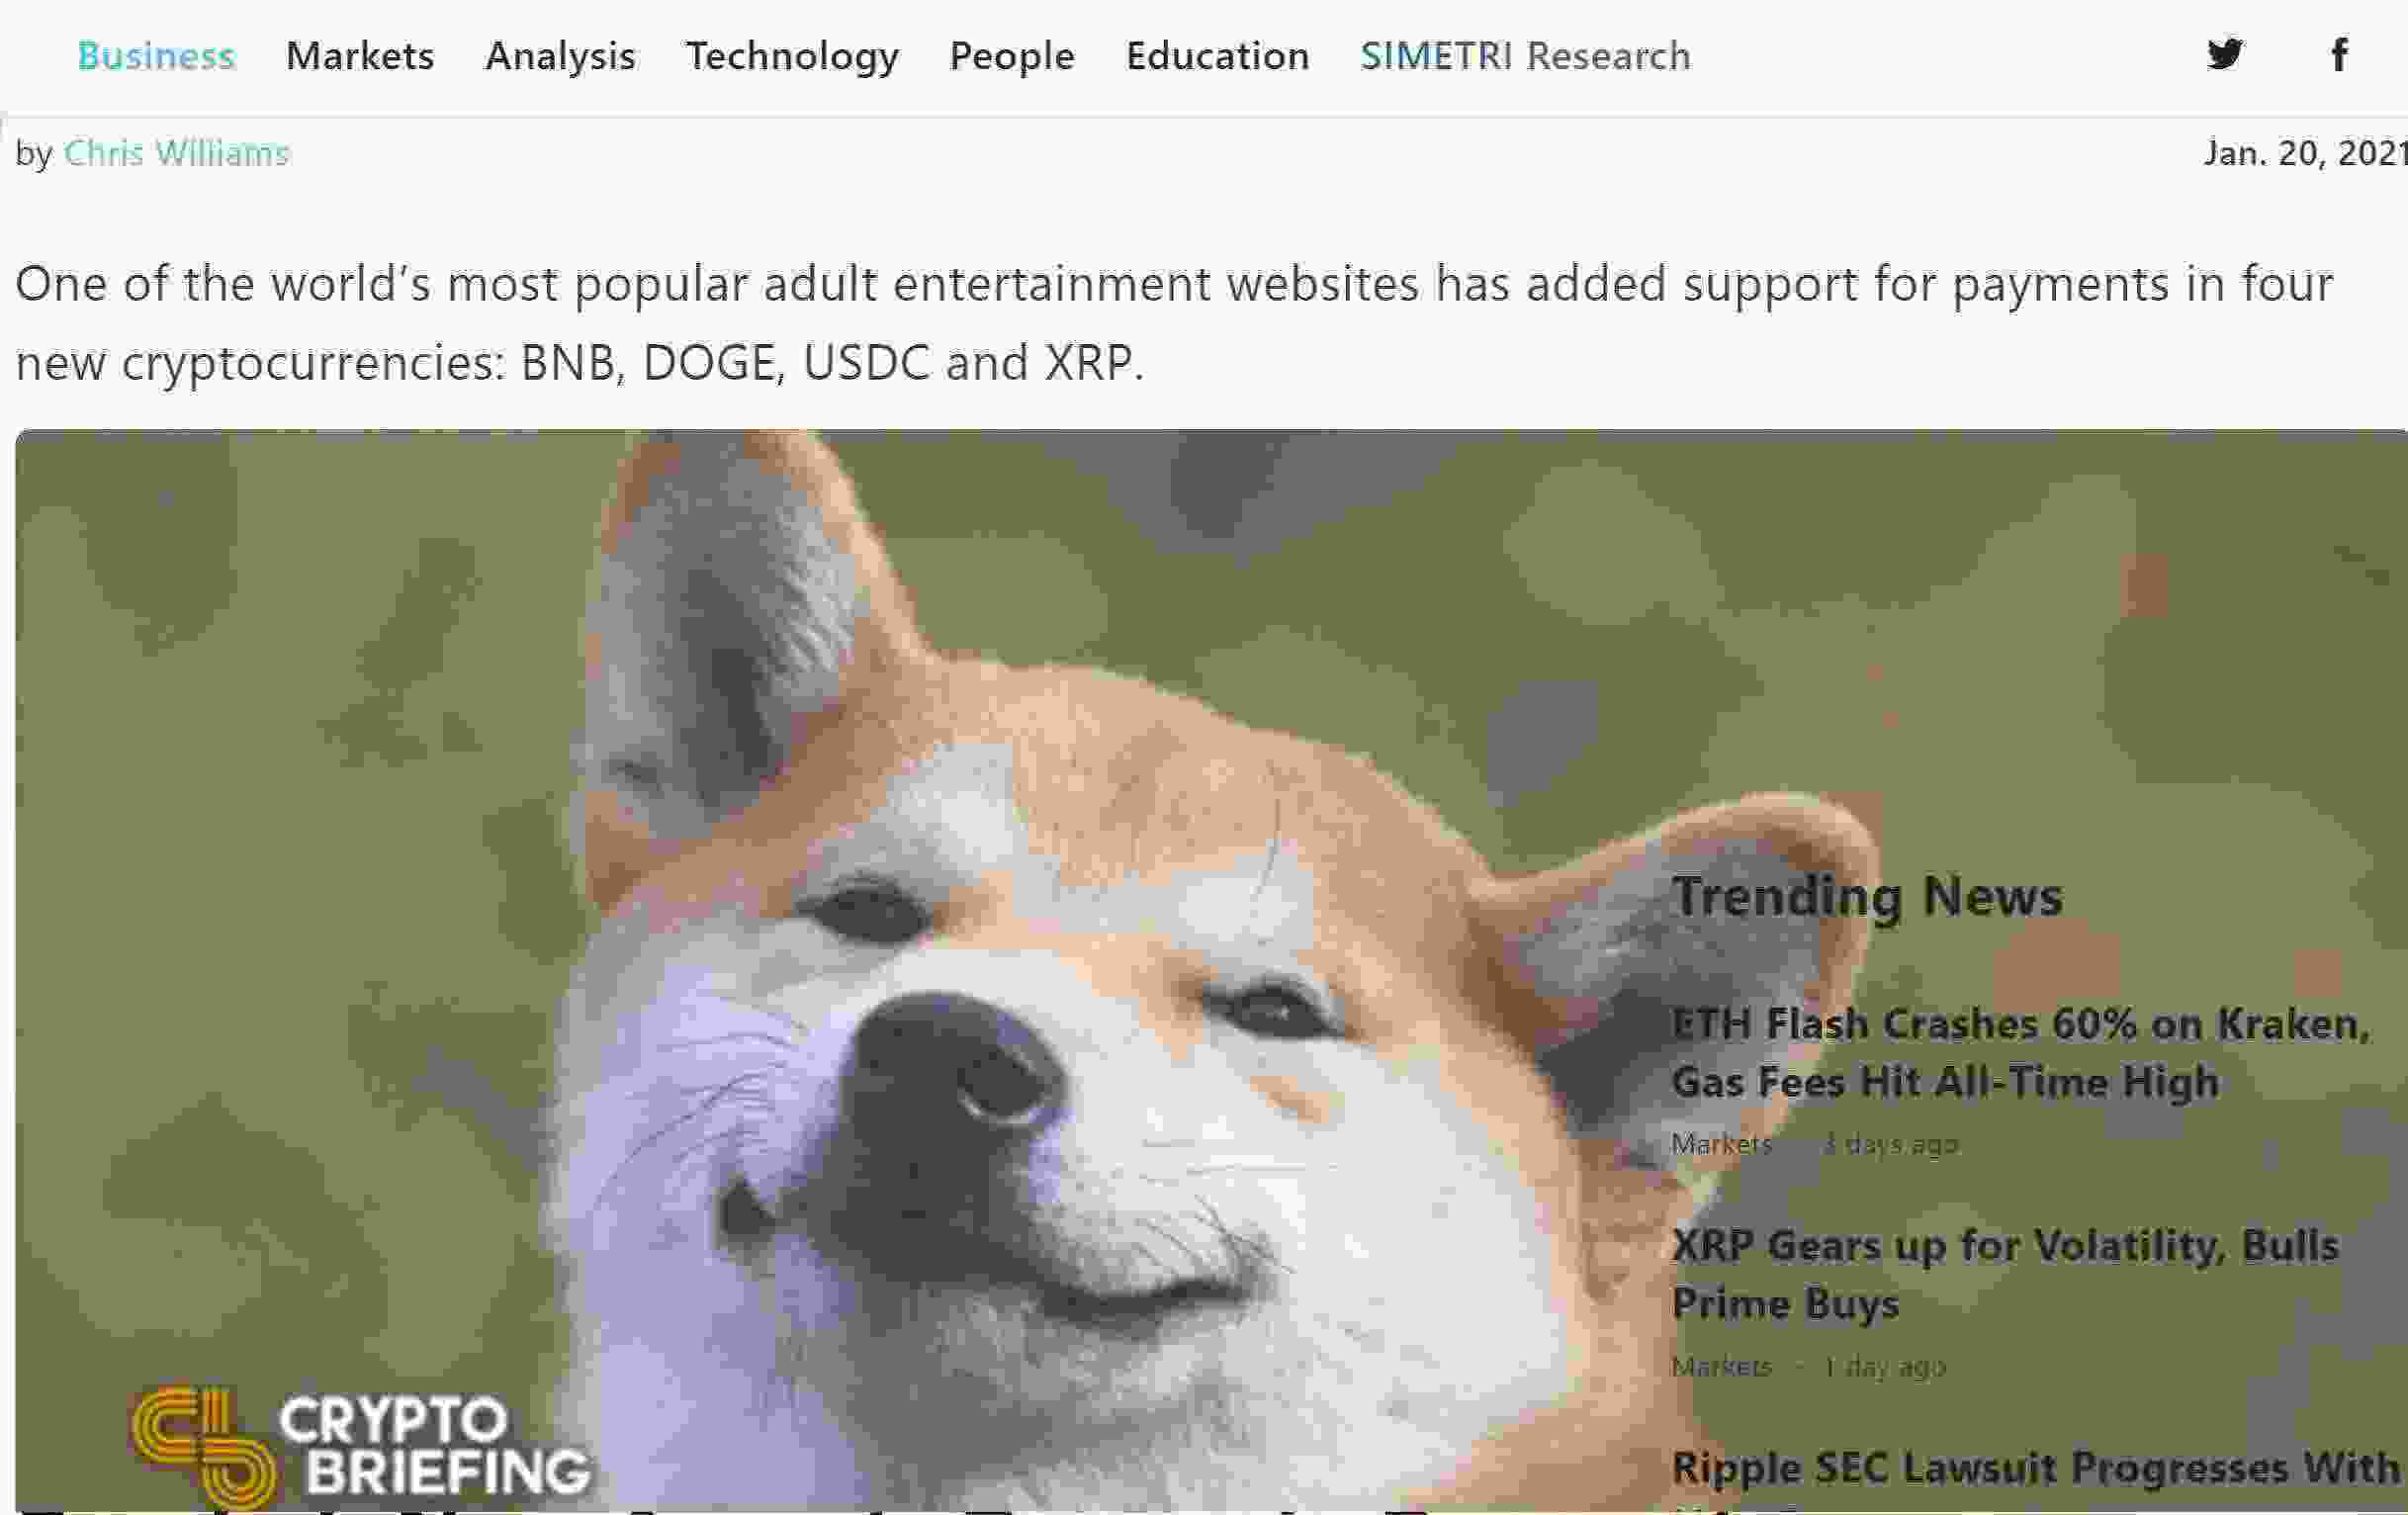 Pornhub-Now-Accepts-Dogecoin-Payments-Crypto-Briefing.jpg